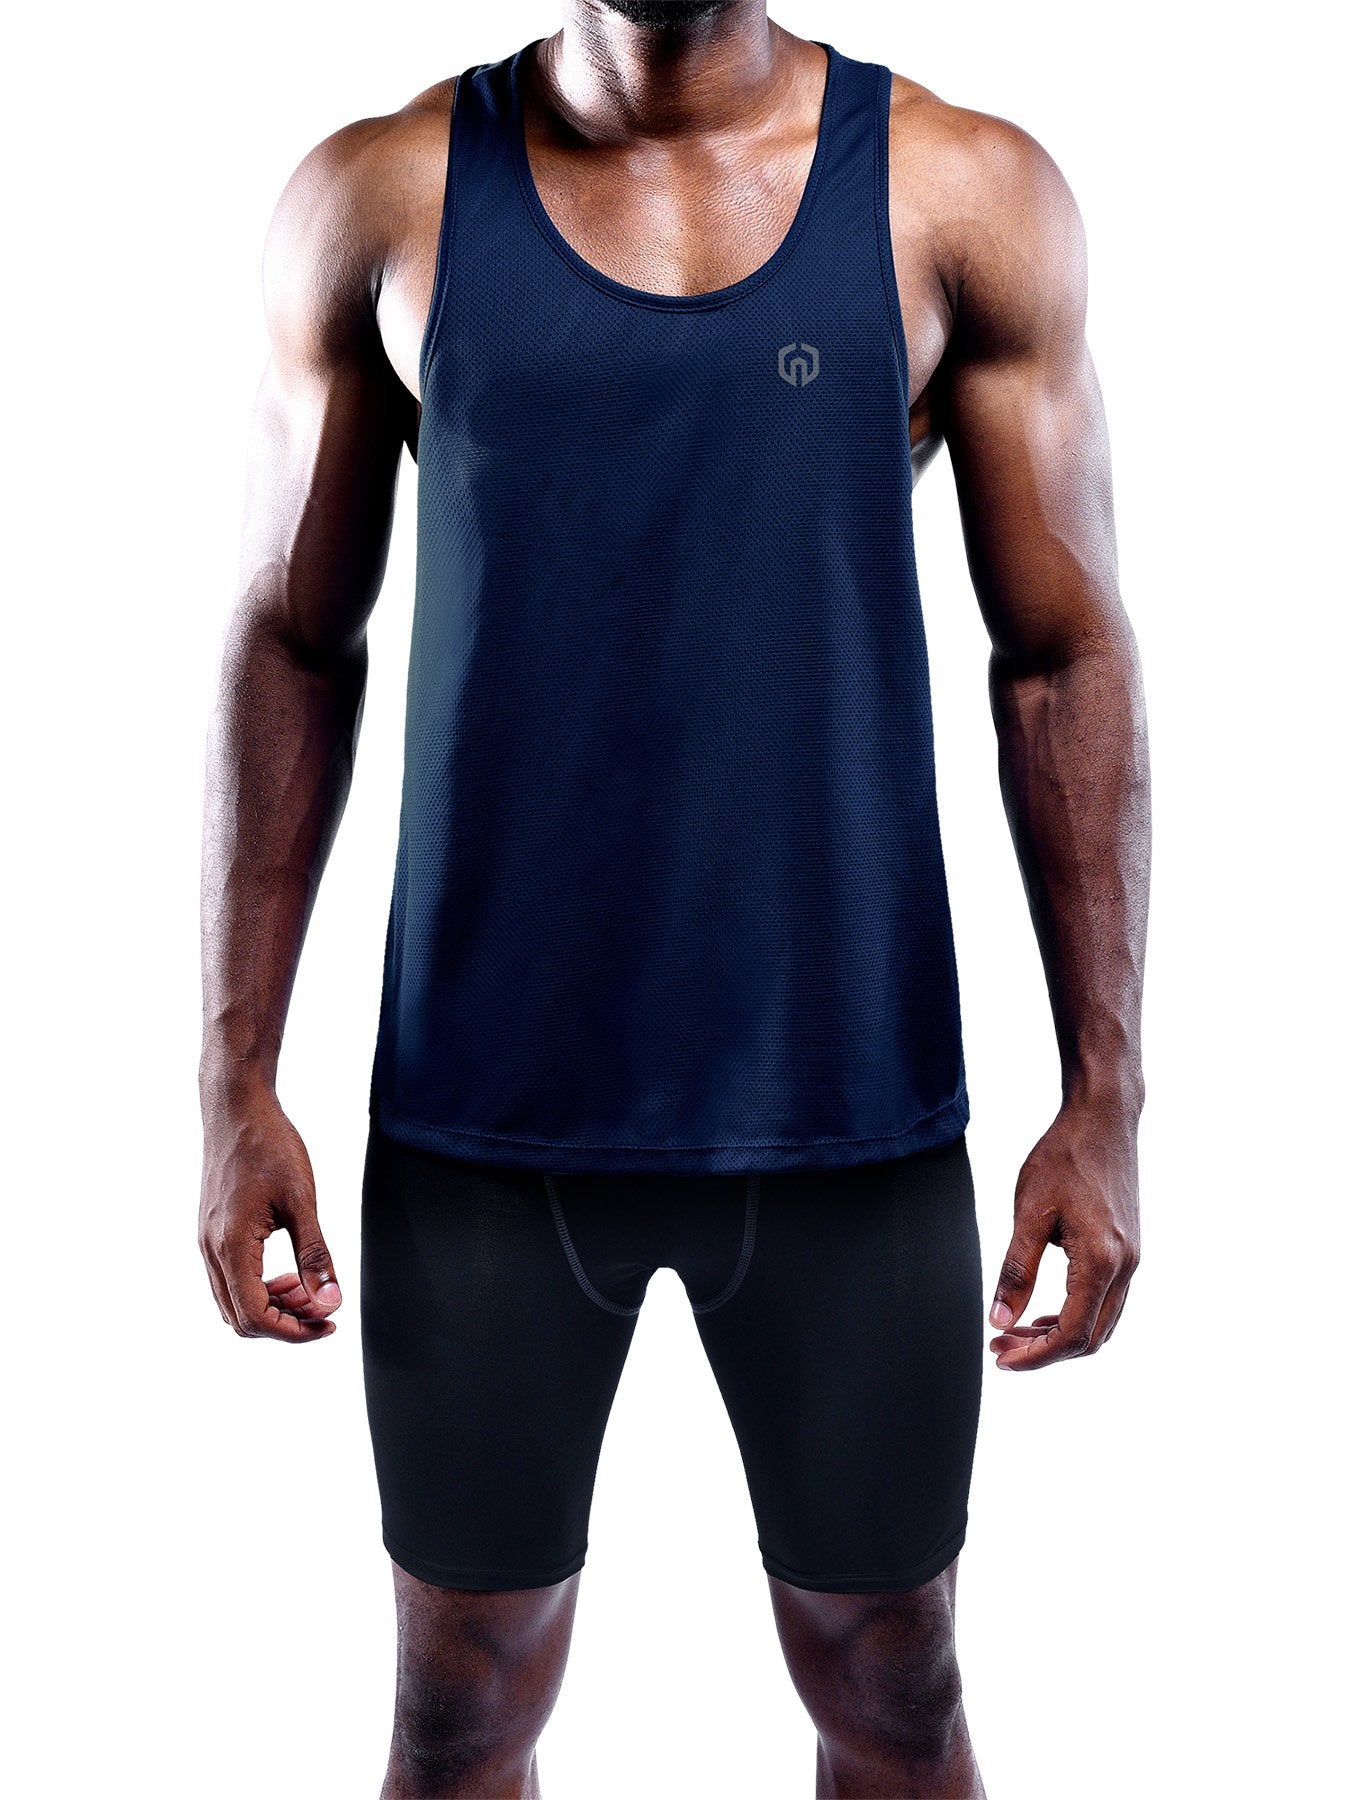 Neleus Men's 3 Pack Dry Fit Muscle Tank Workout Gym Shirt